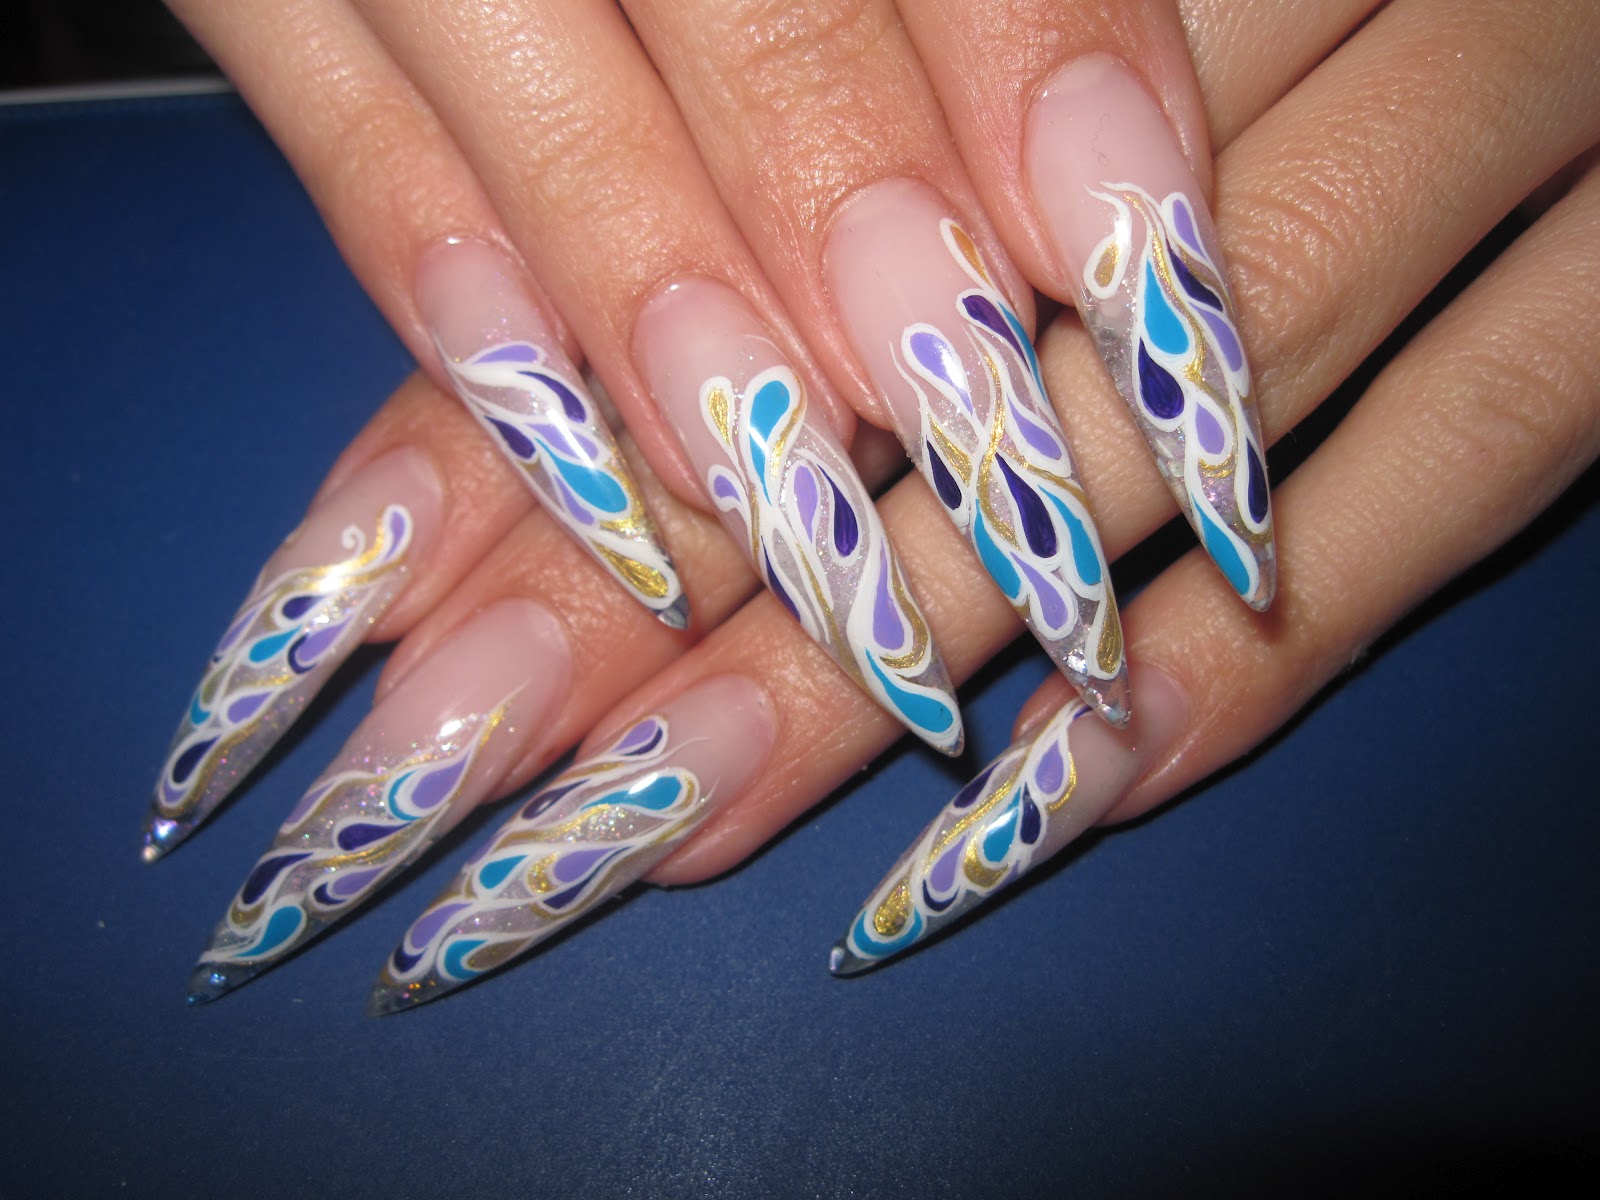 3. Nail Art Design Pictures [HD] - wide 5